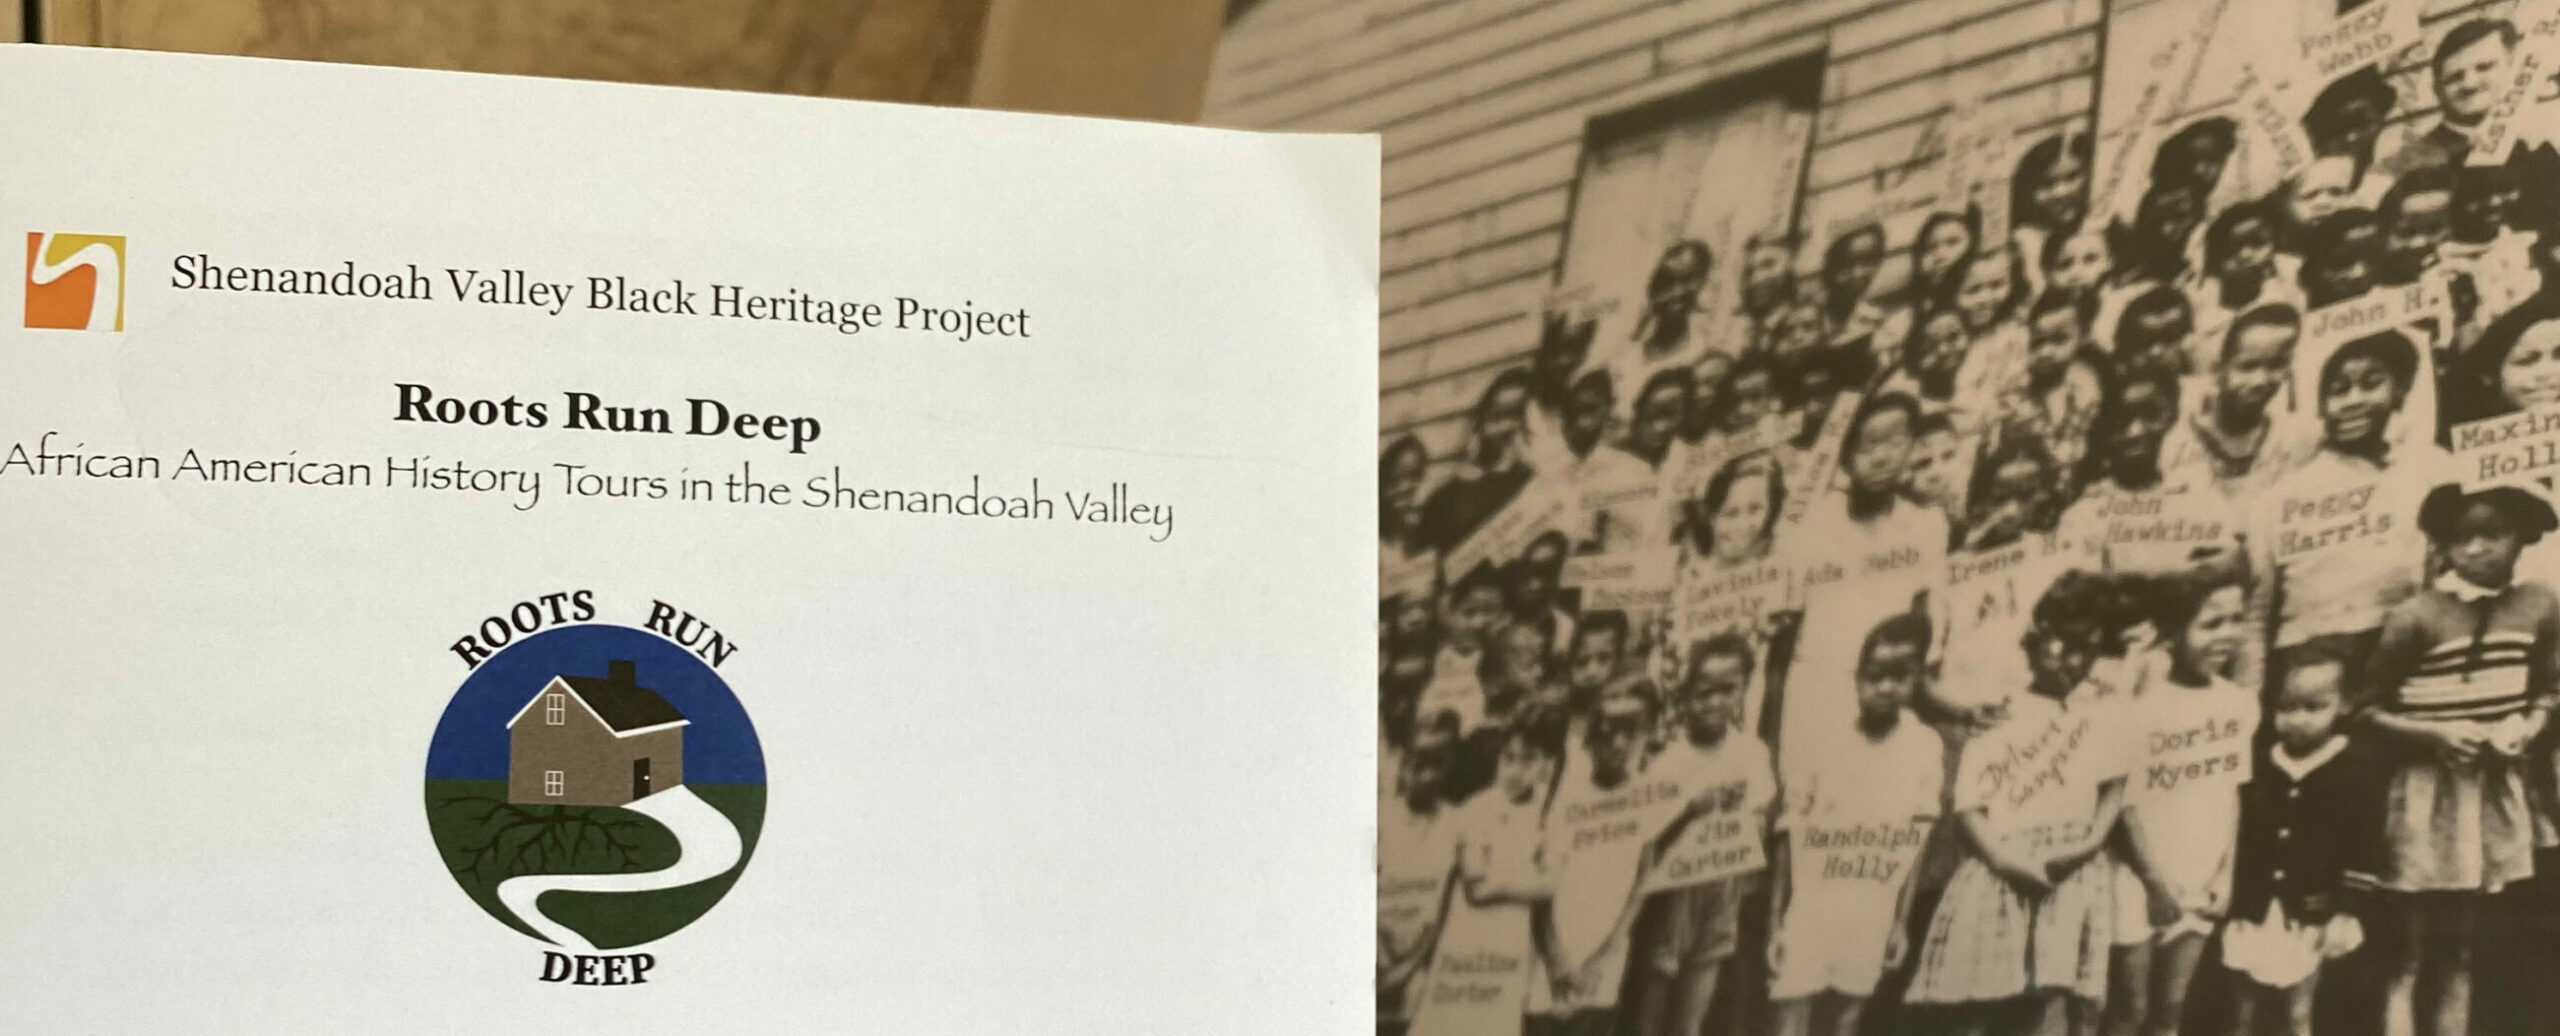 A brochure for the roots run deep tours in Harrisonburg, Virginia sits in front of an aged black and white photo of Black students gathered and posing for the photo outside of what appears to be a school building.